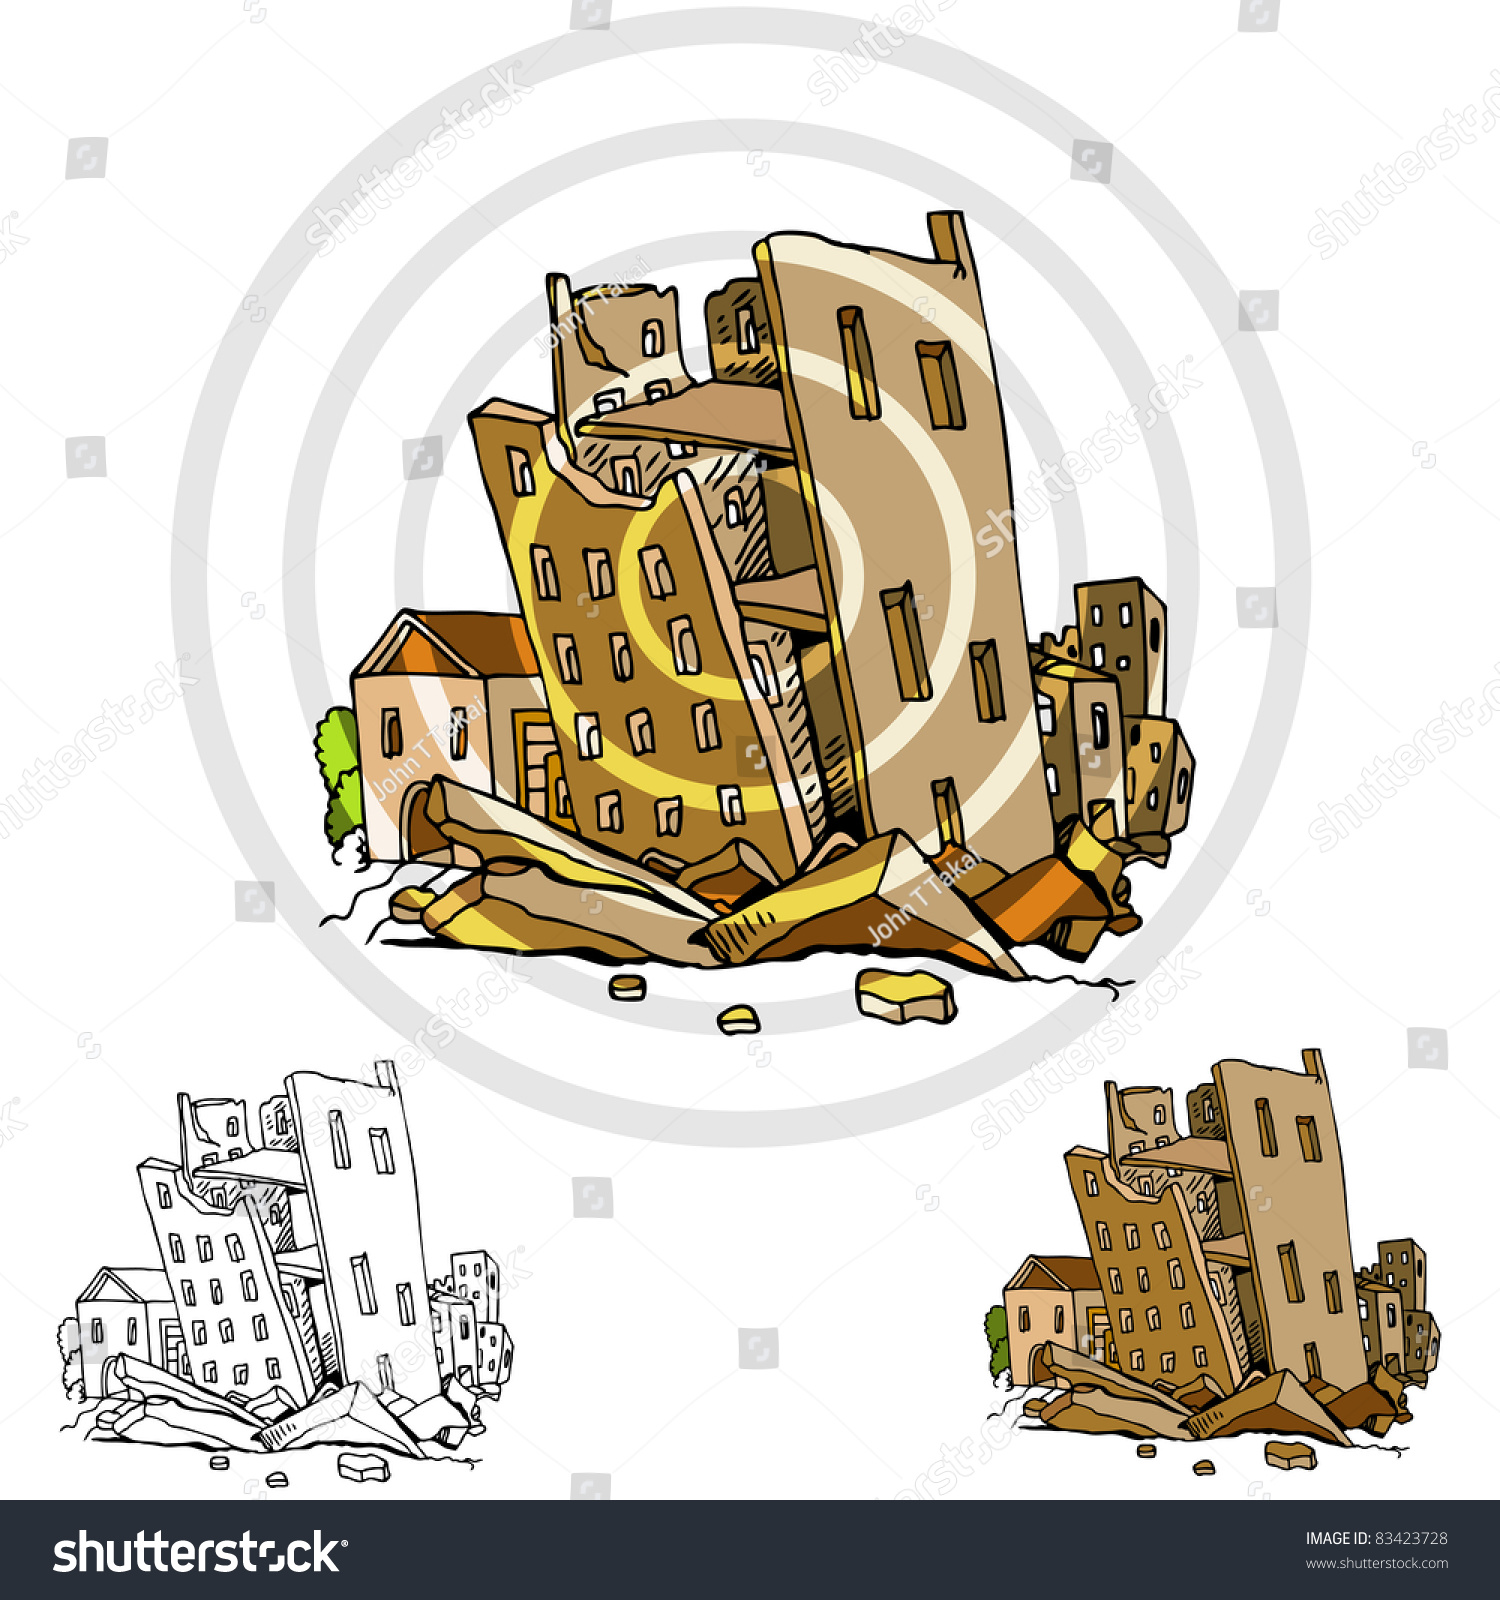 destroyed house clipart - photo #11